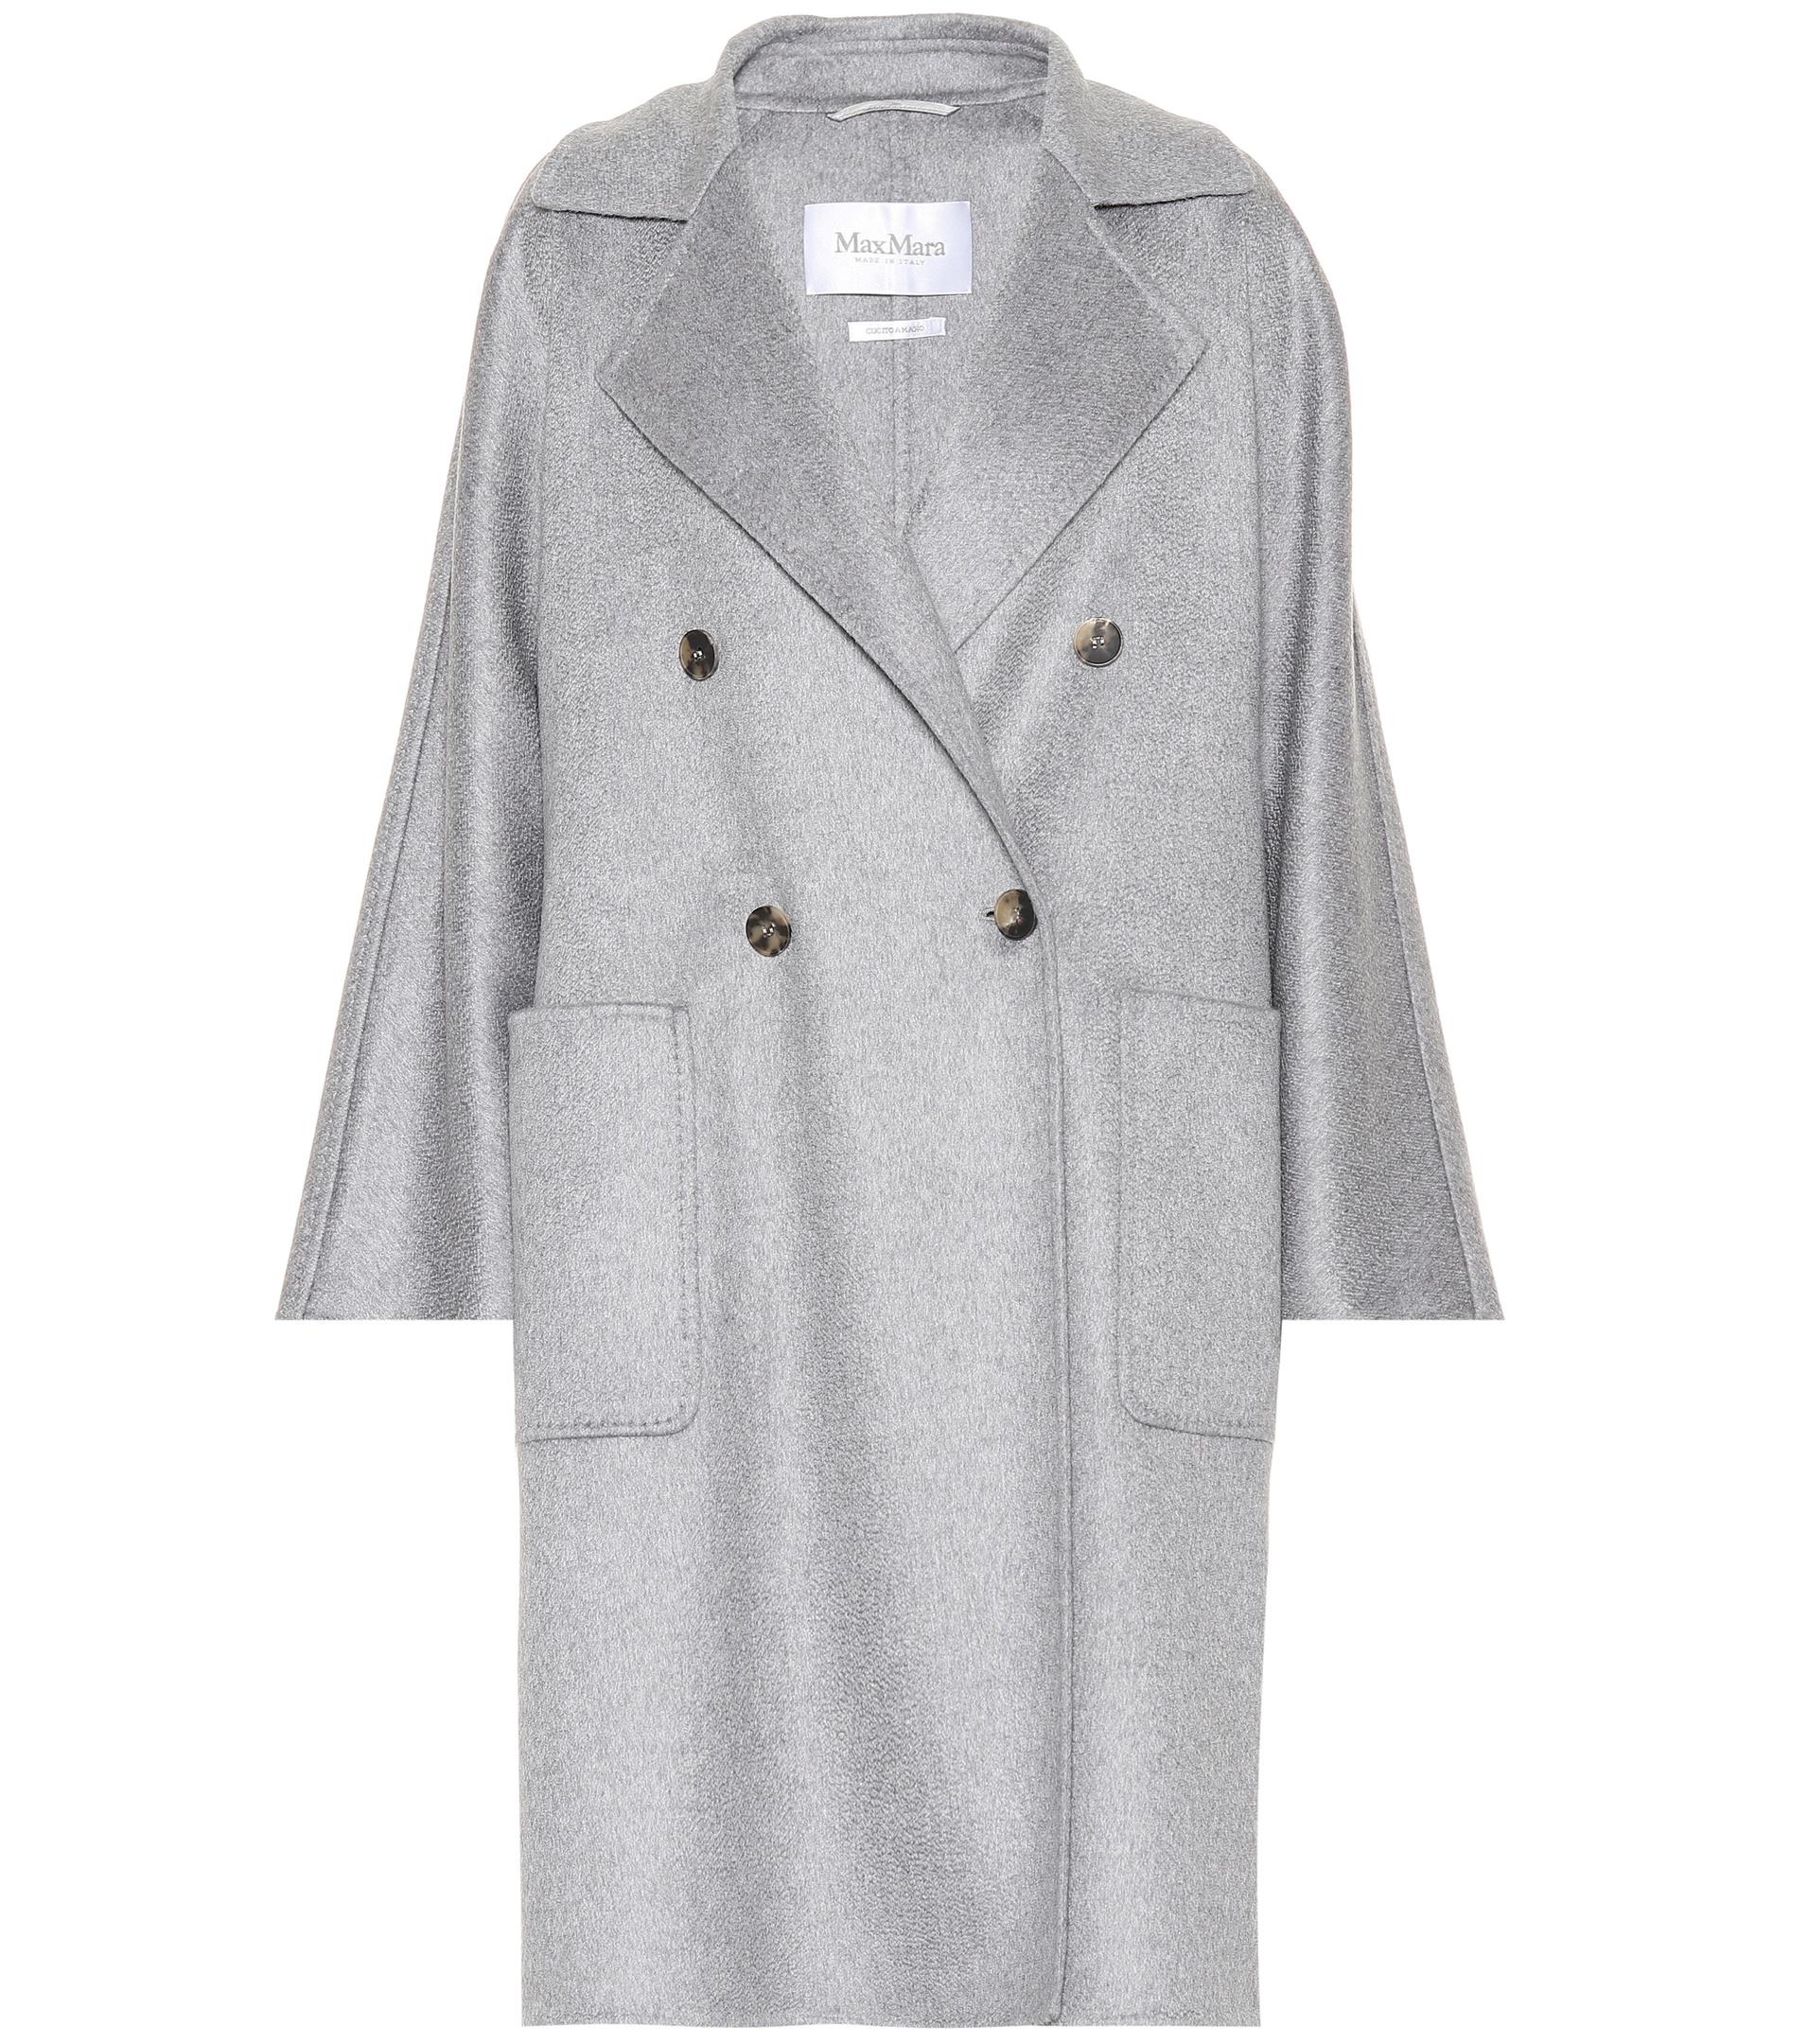 Max Mara Faust Cashmere Coat in Grey (Gray) - Lyst